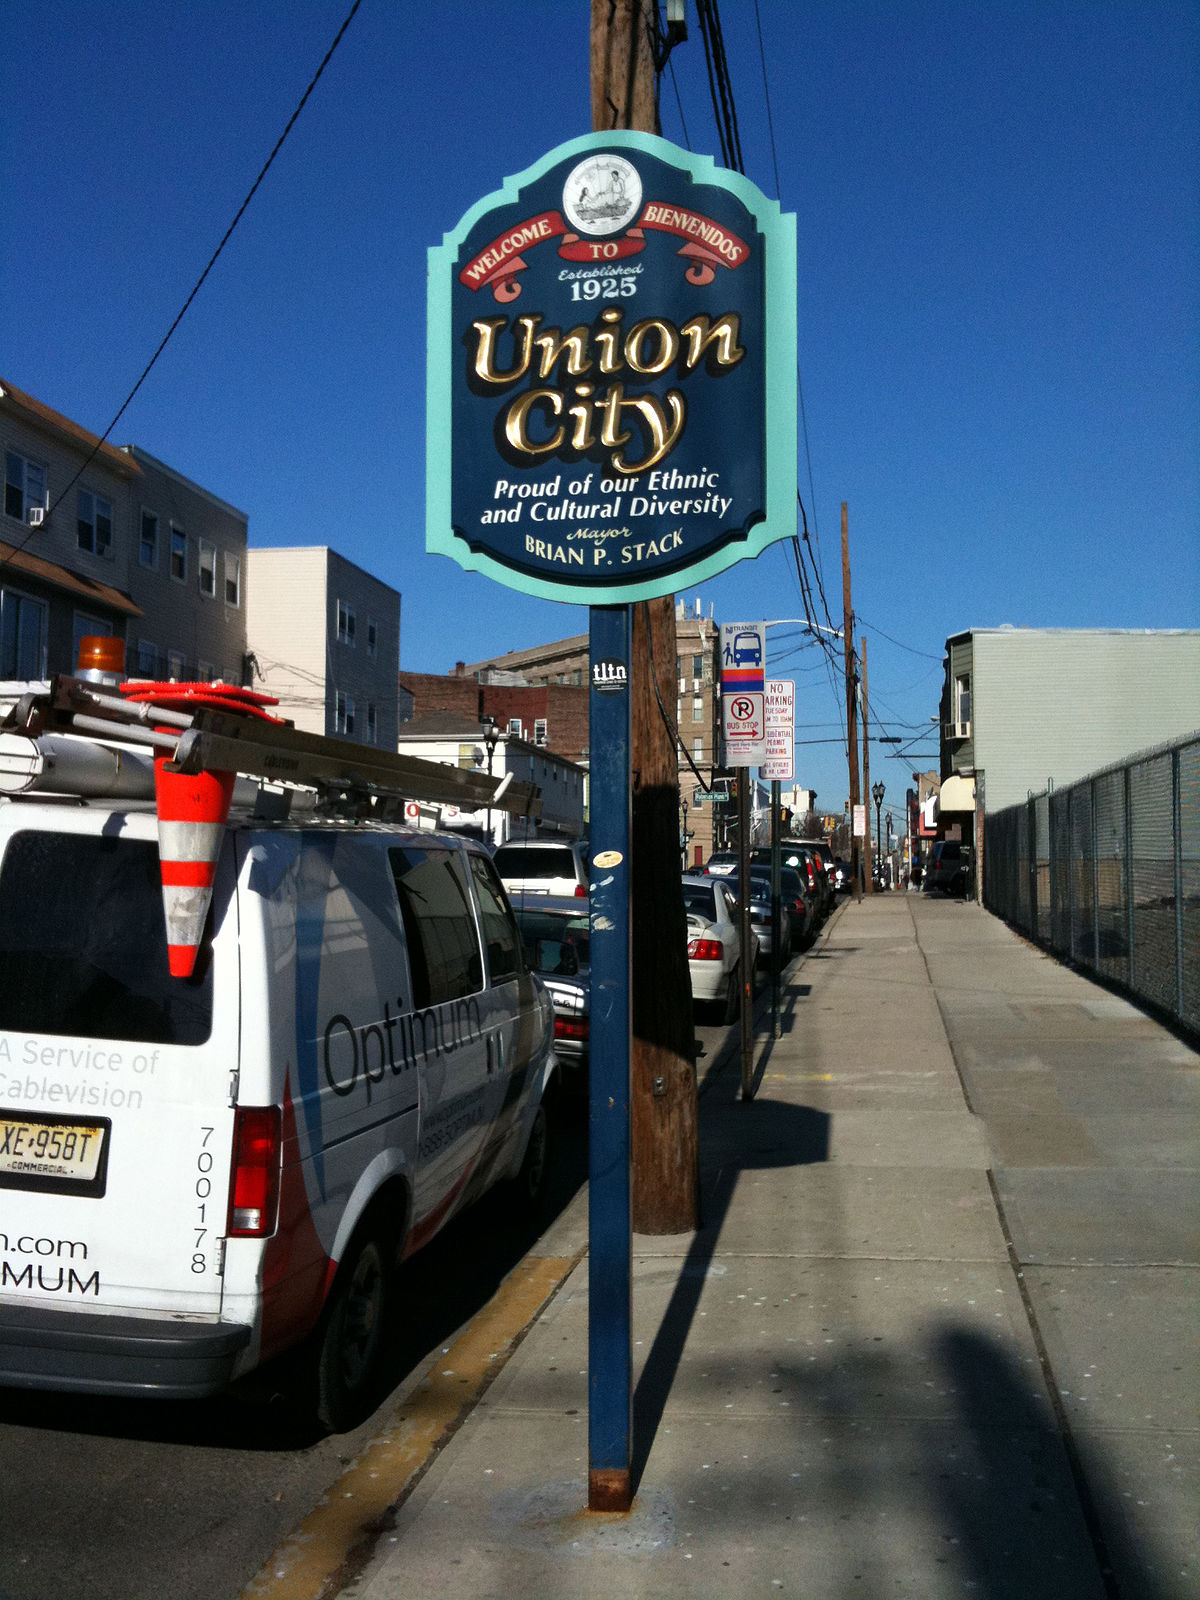 Union City (New Jersey) – Travel guide at Wikivoyage